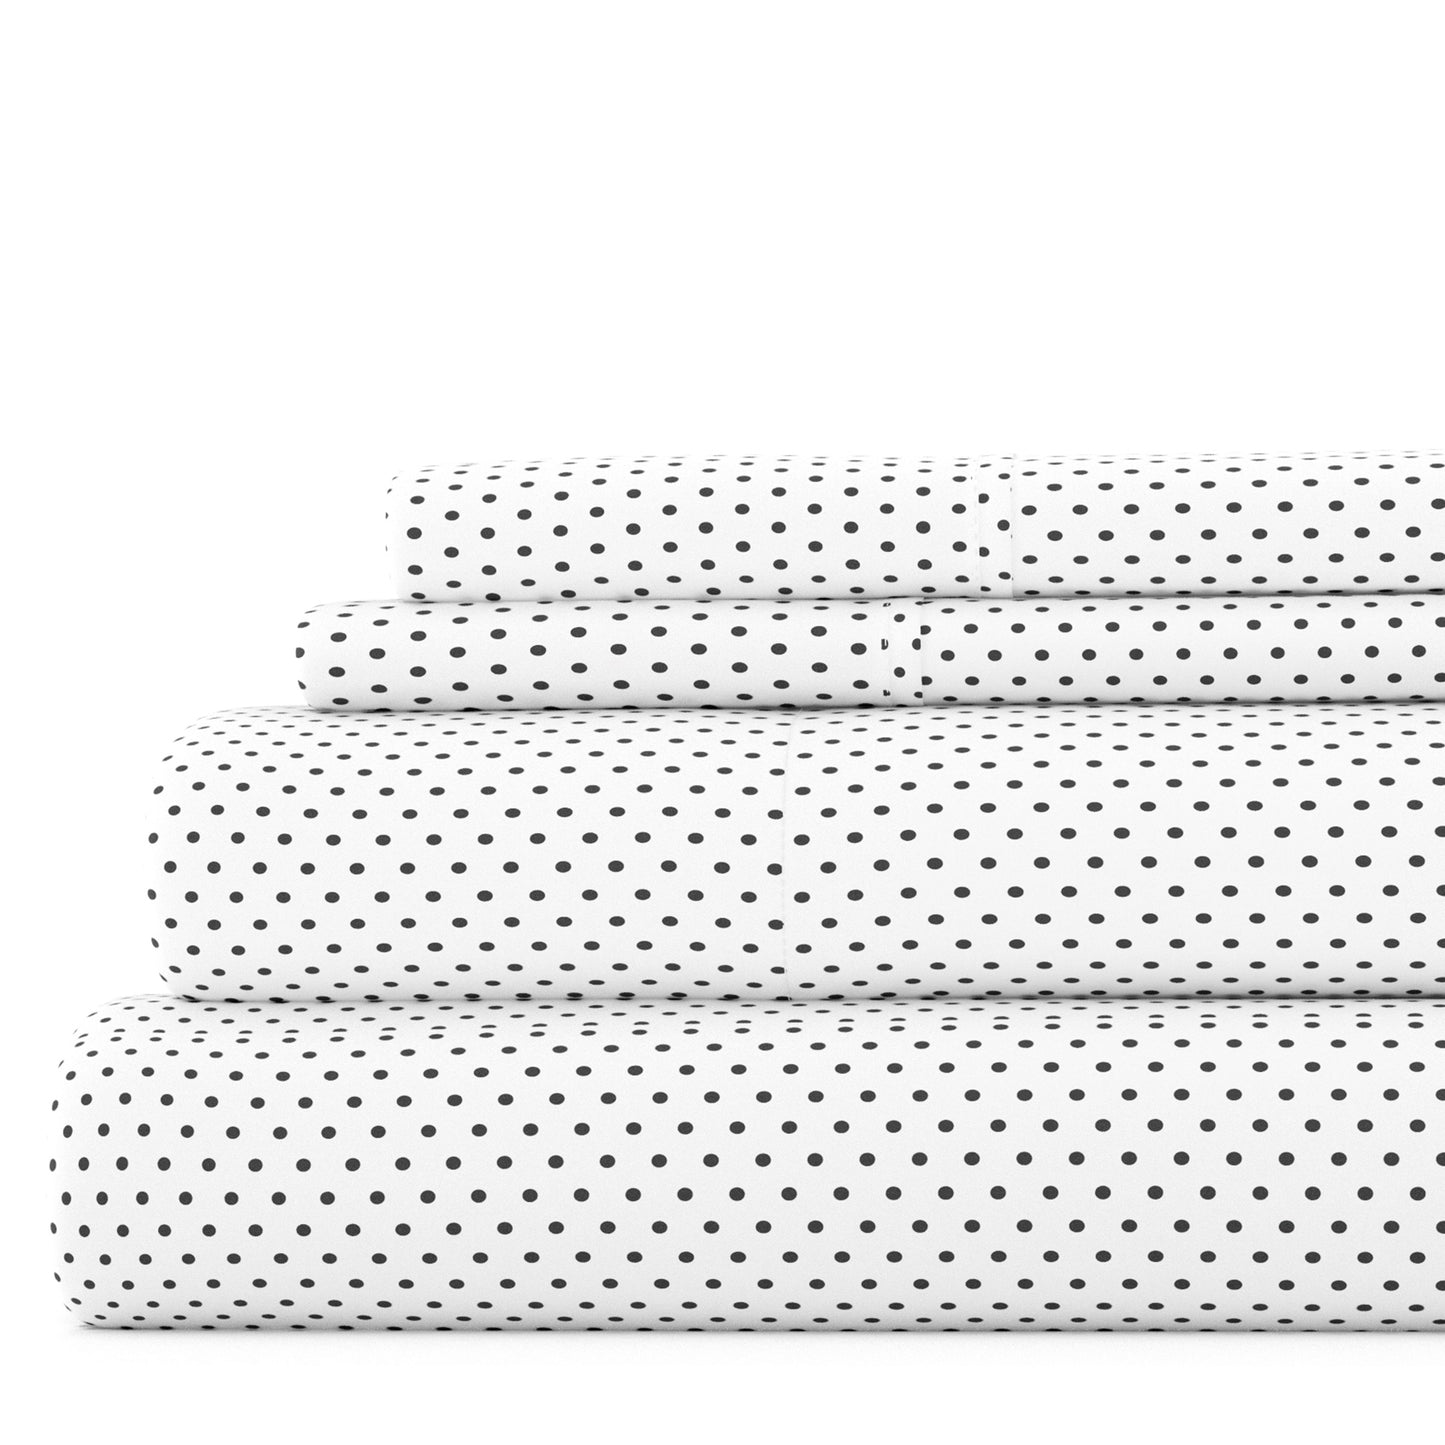 Sheet Sets in Dots and Stripes Patterns